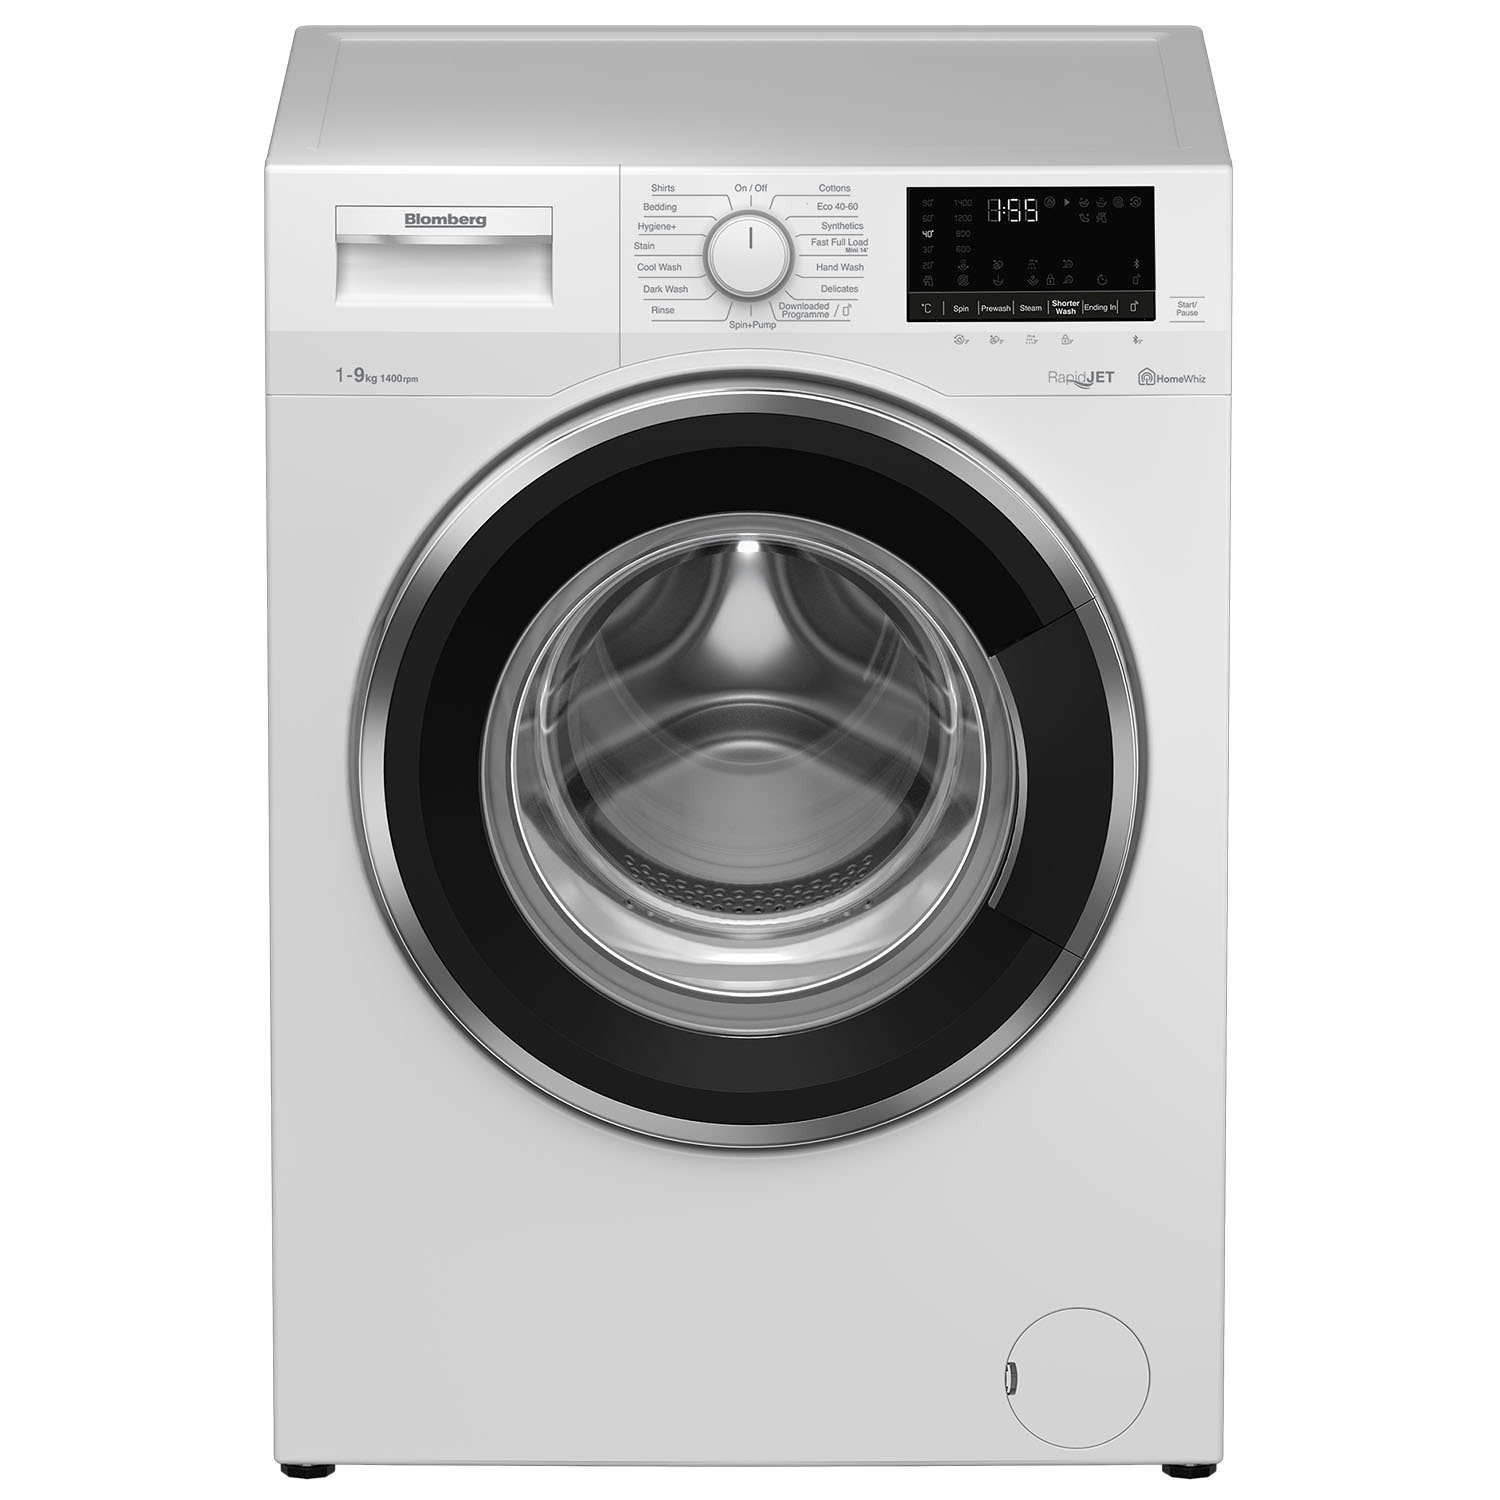 Blomberg LWF194520QW 9kg 1400 Spin Washing Machine with RapidJet technology - White - 0